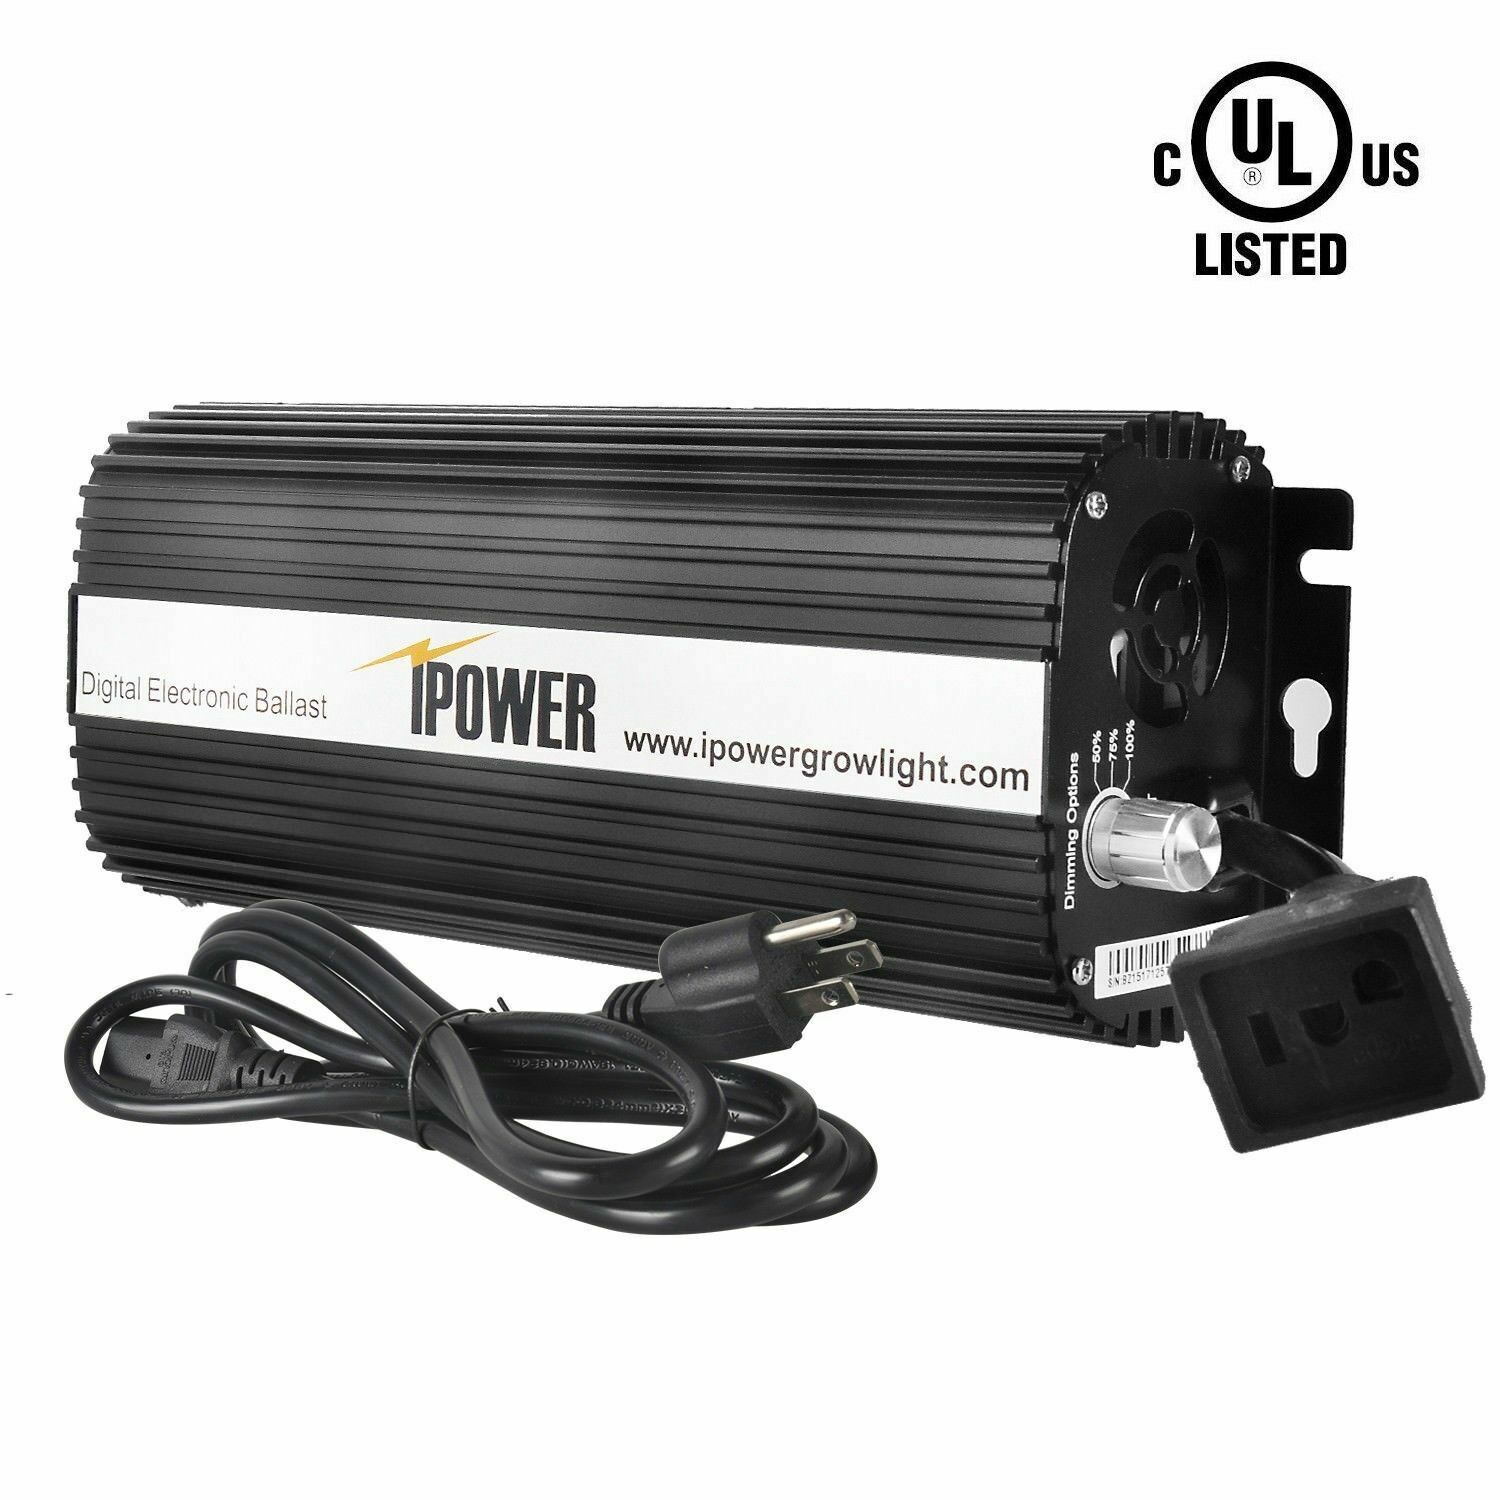 iPower 400/600/1000W Digital Dimmable Electronic Ballast for HPS MH Grow Light